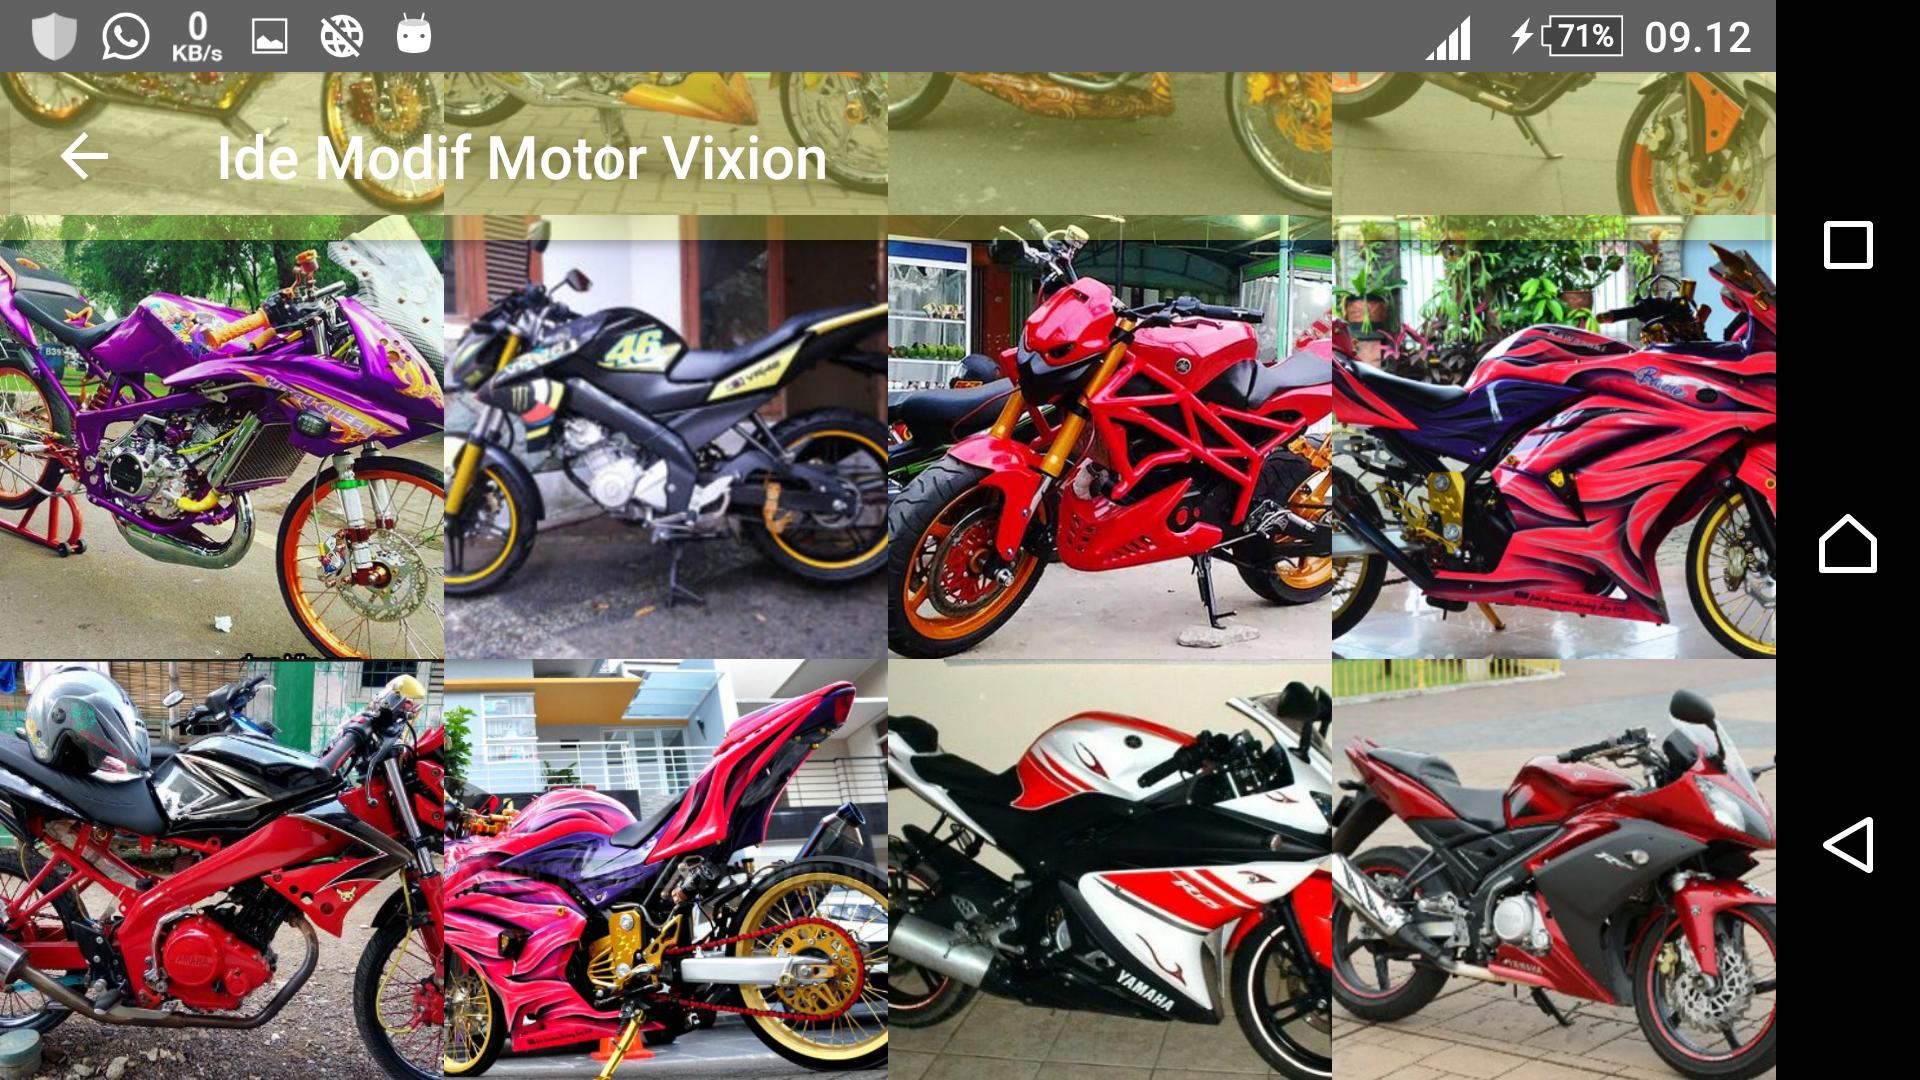 Ide Modif Motor Vixion For Android APK Download